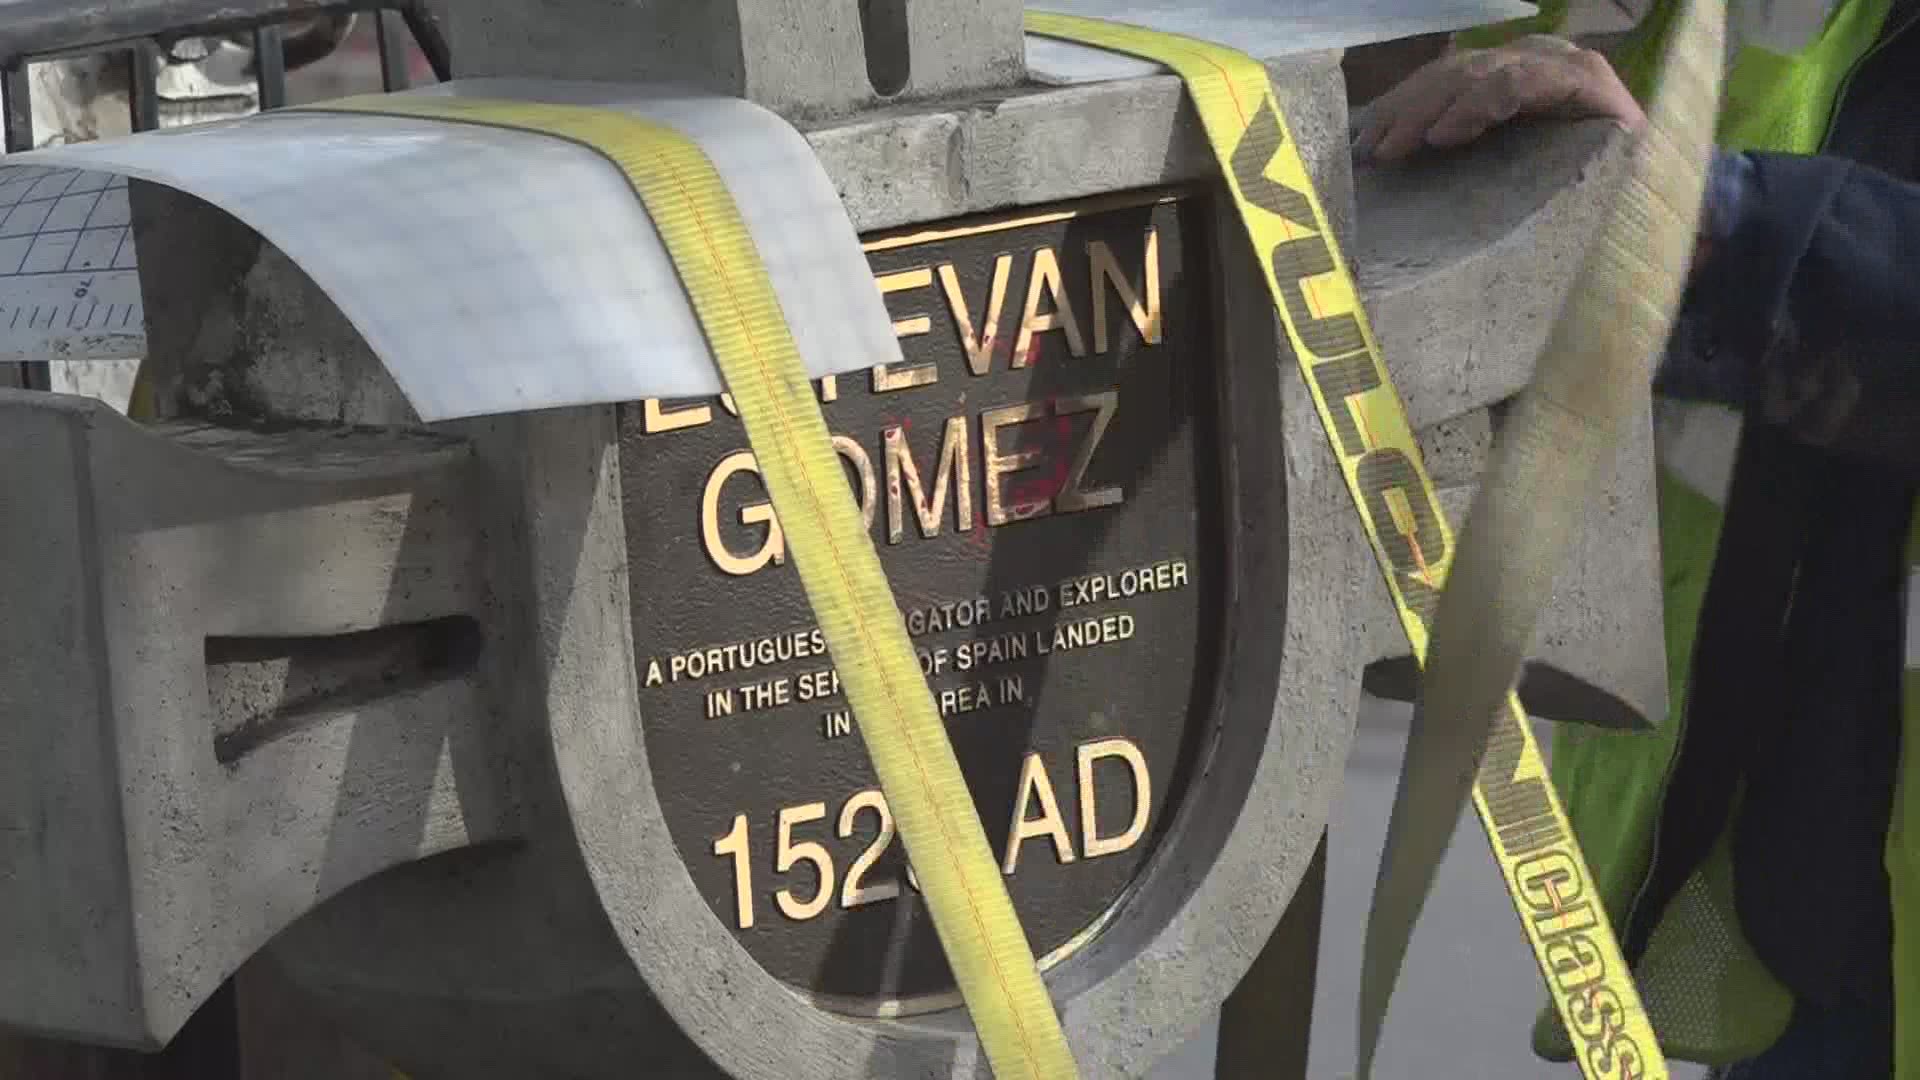 The Estevan Gomez monument will be on display with historical and cultural context.